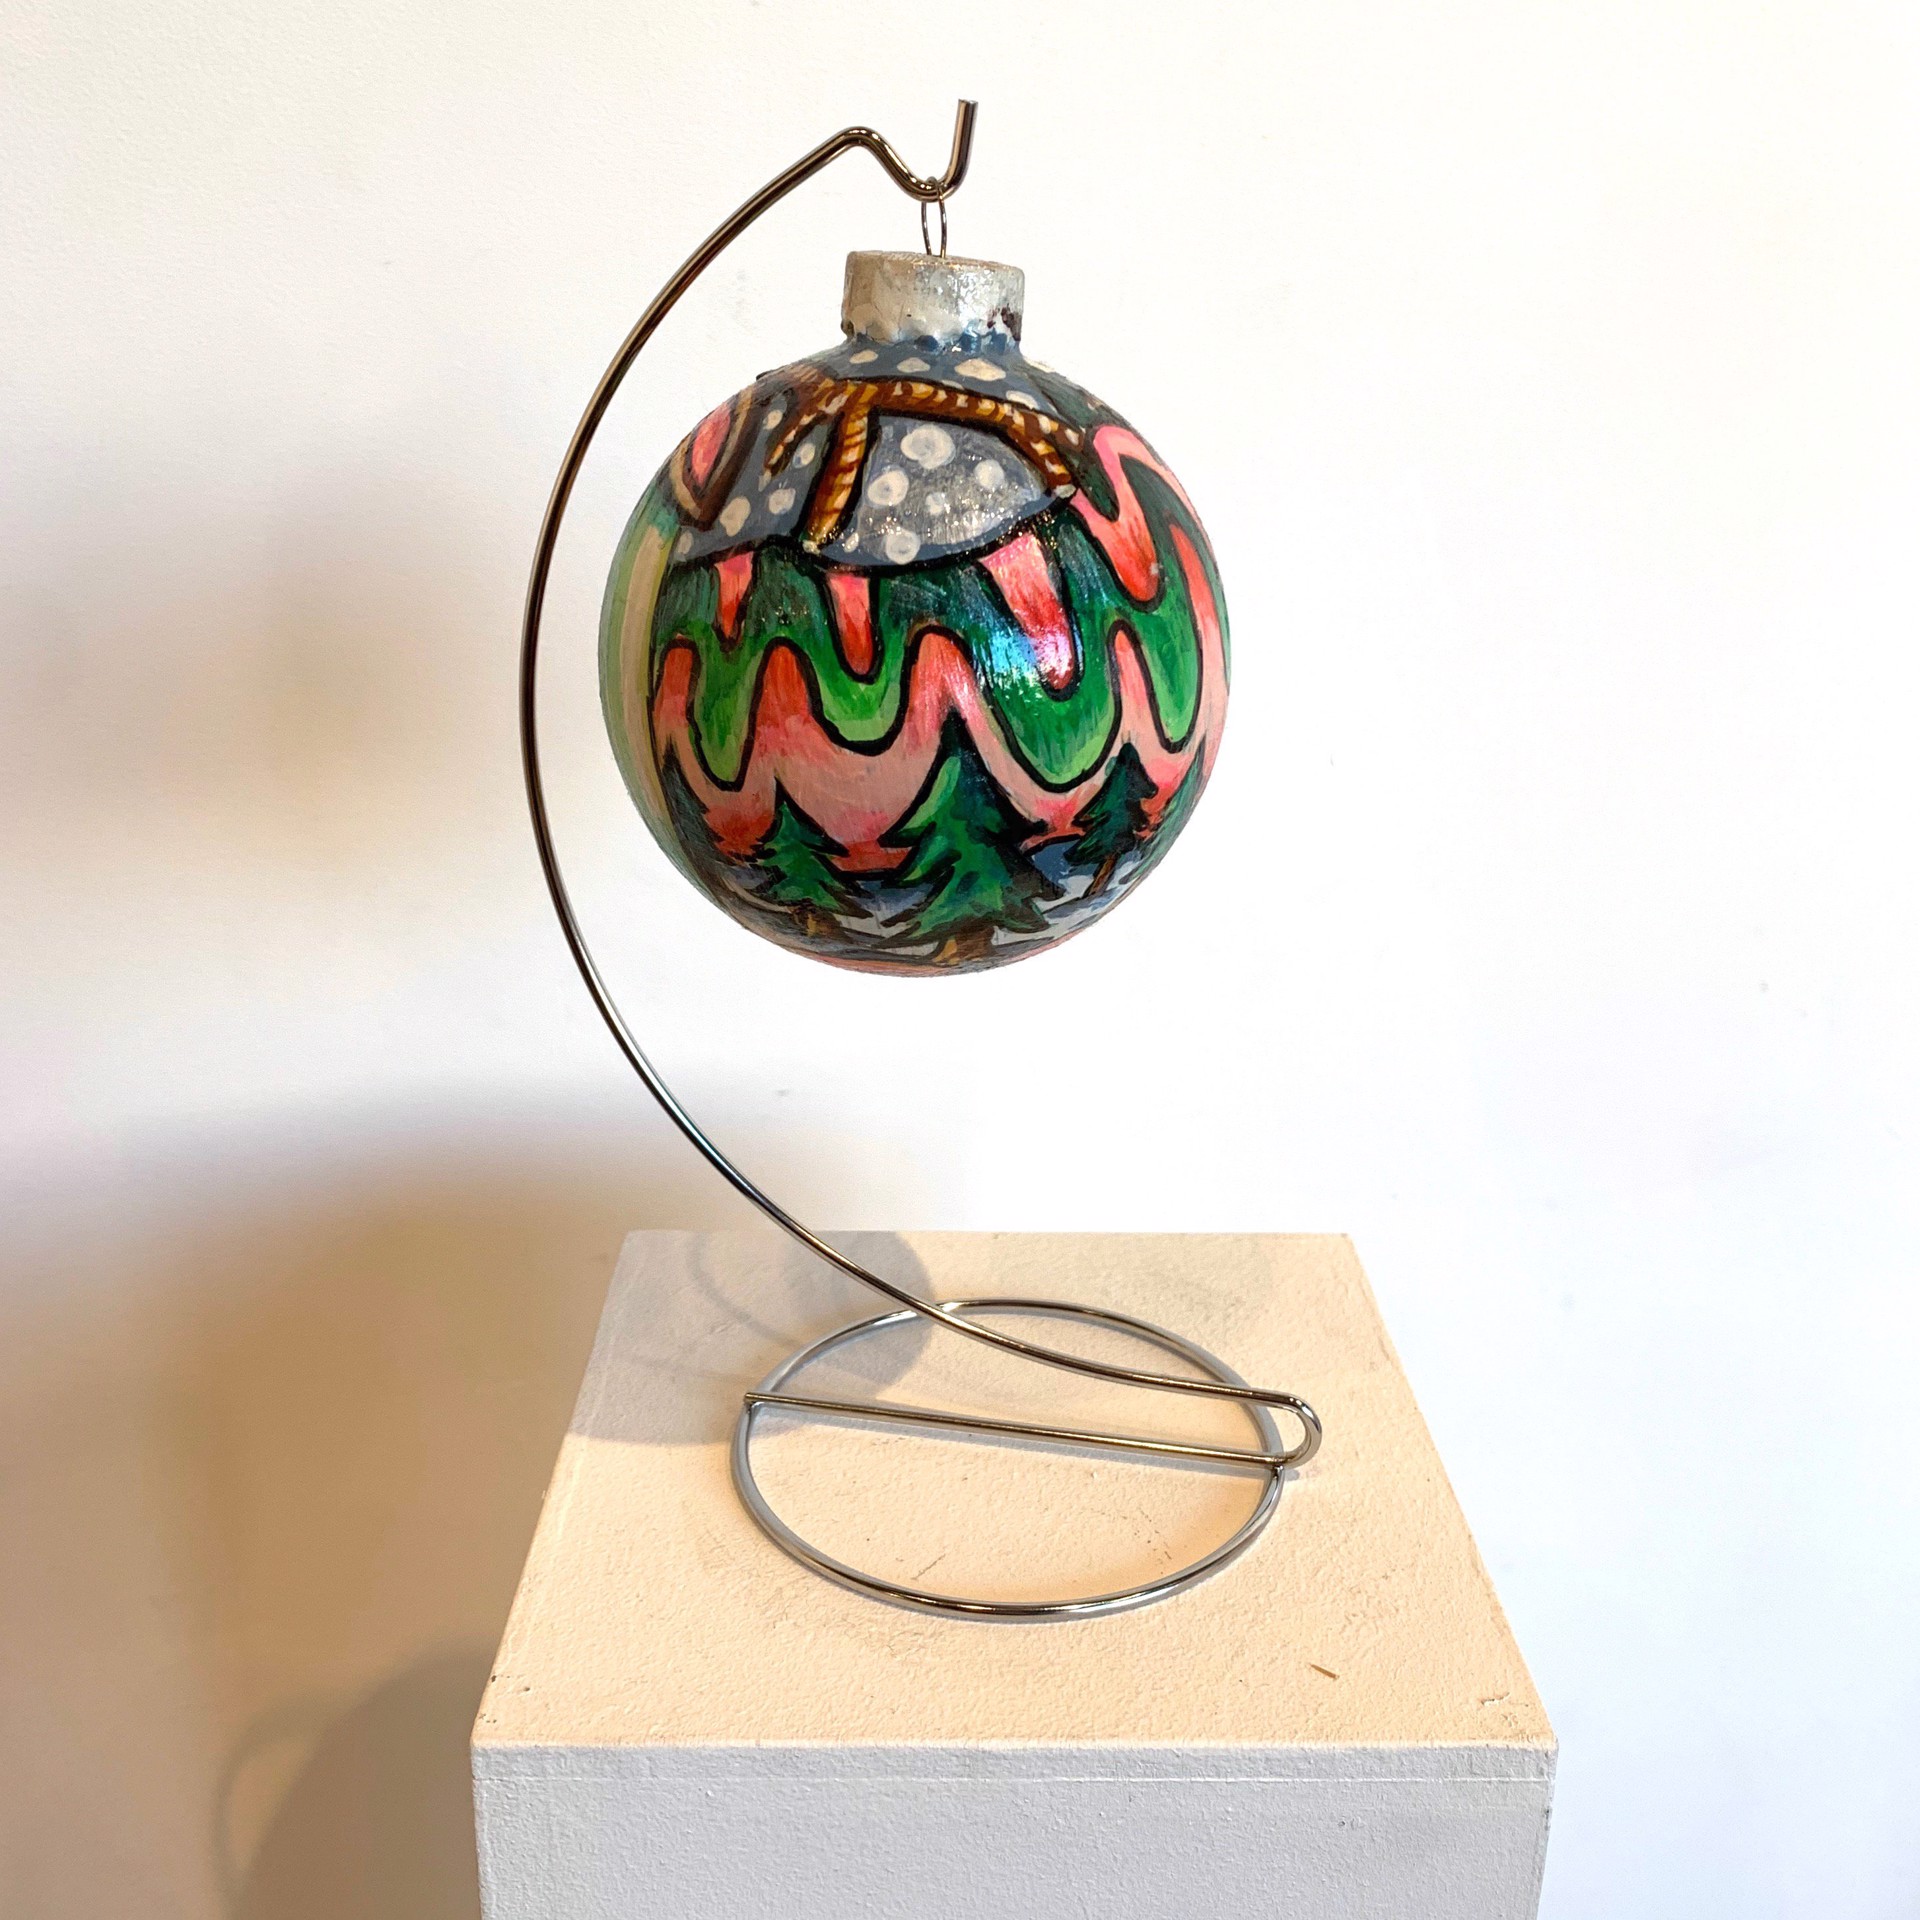 Large Ornament #2 by Carol Powell